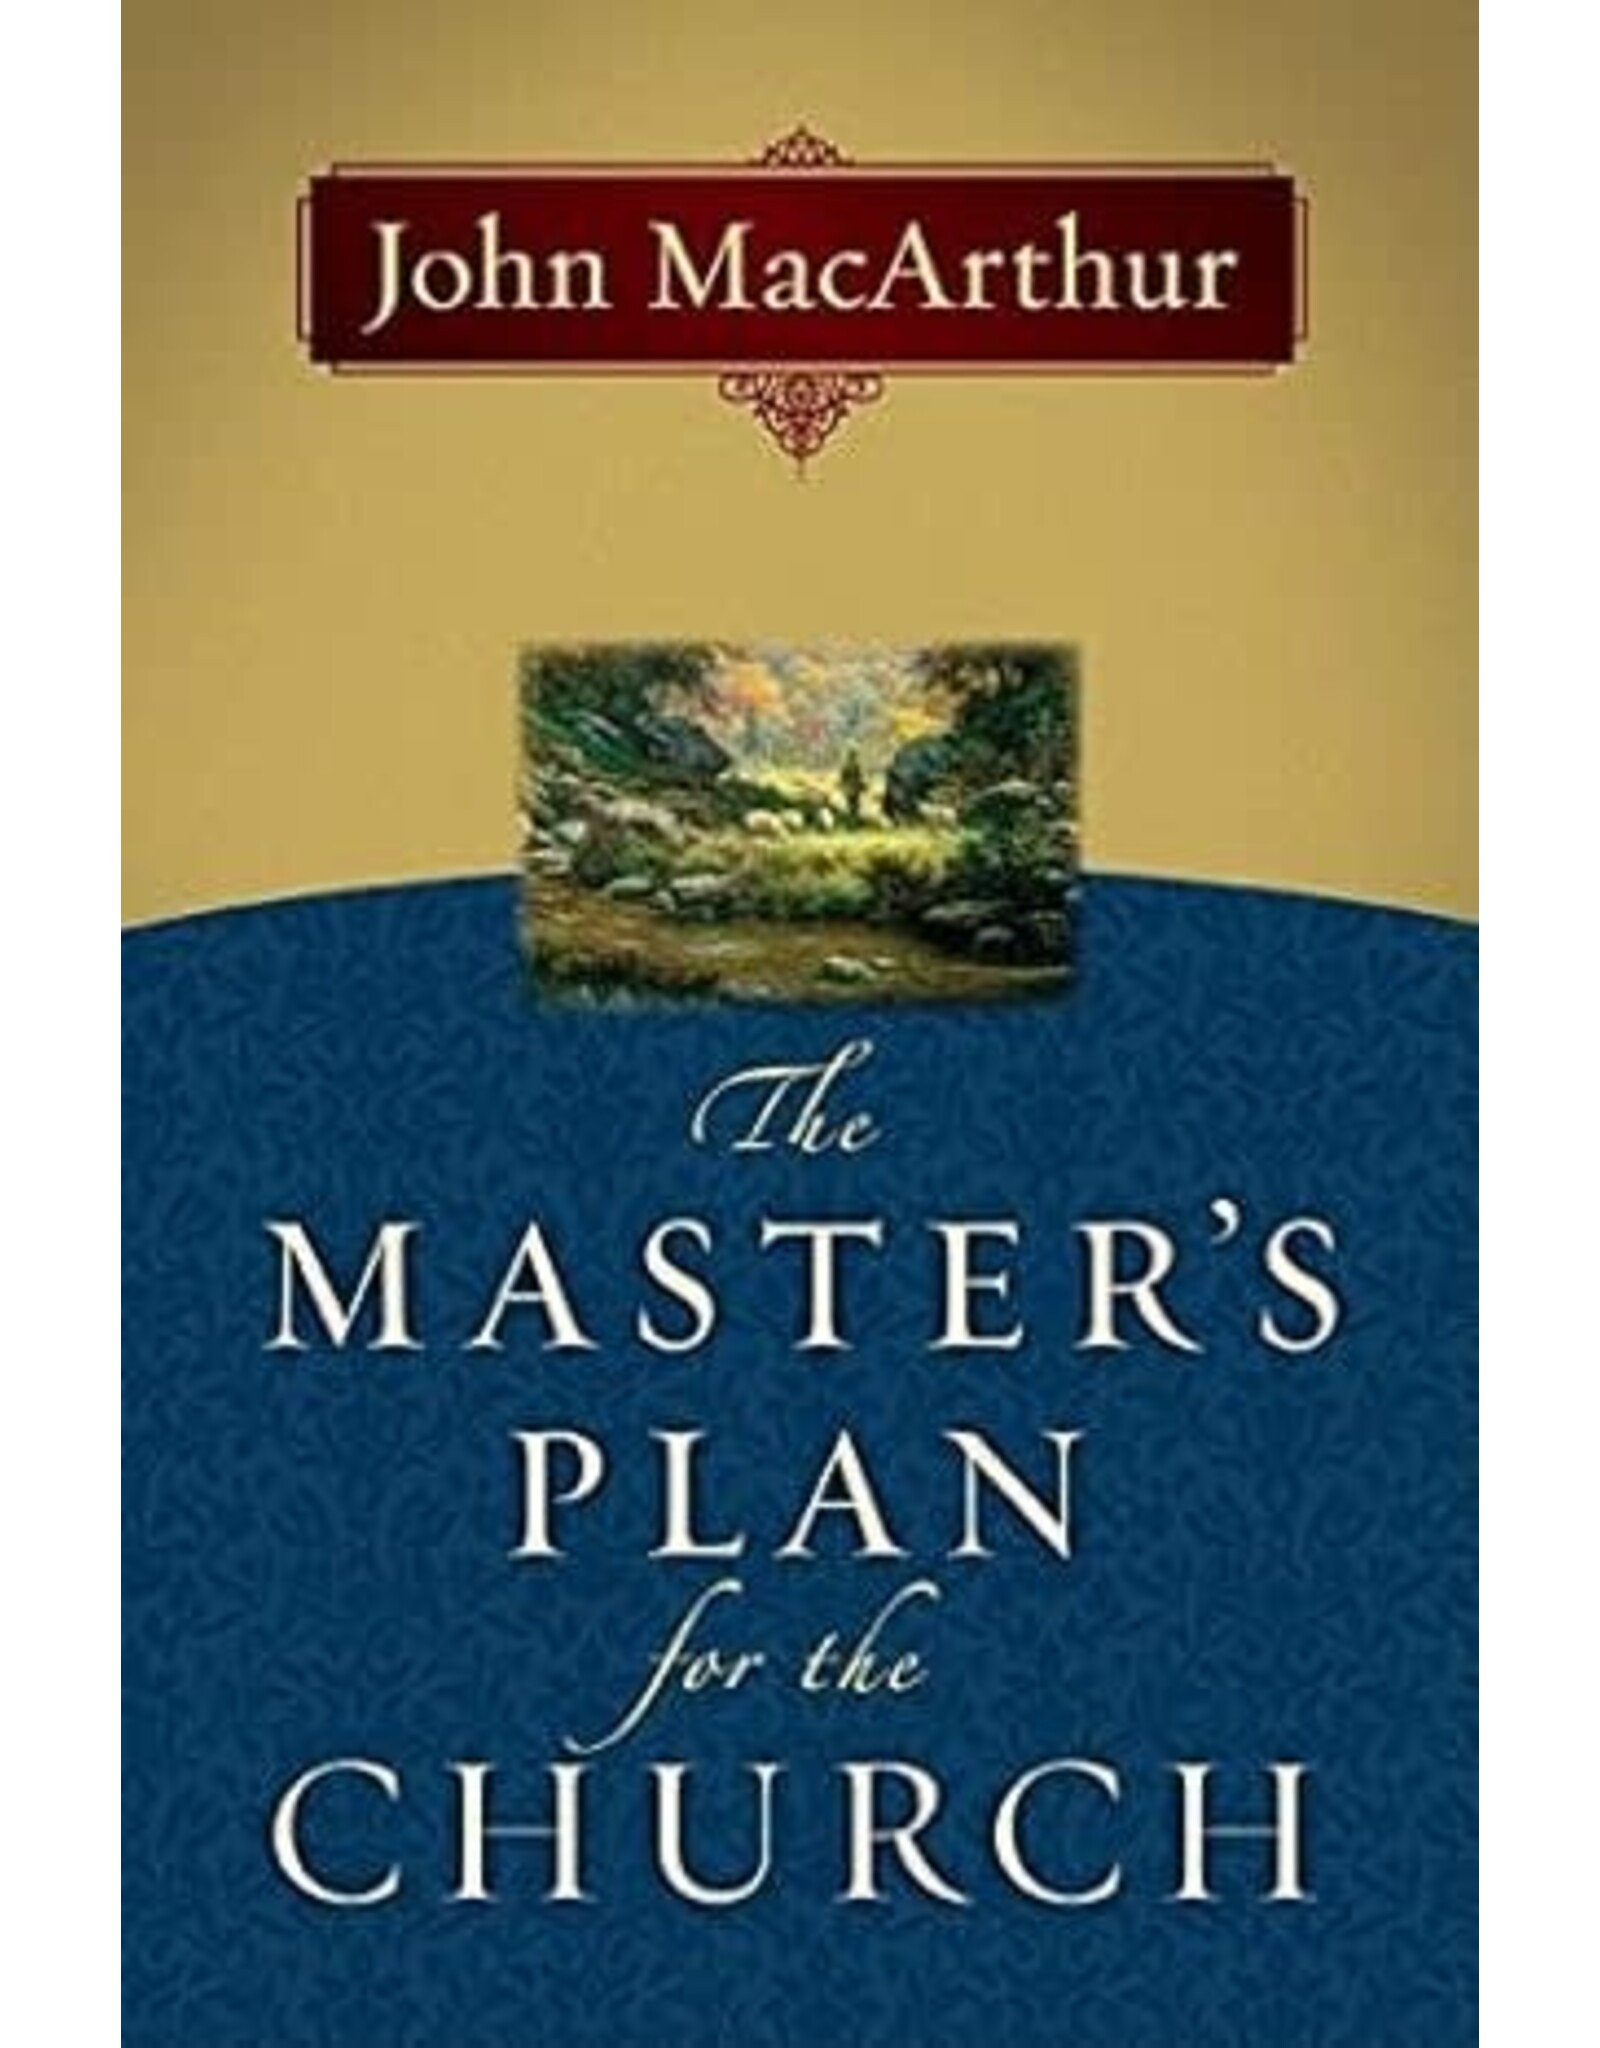 The Master's Plan for the Church